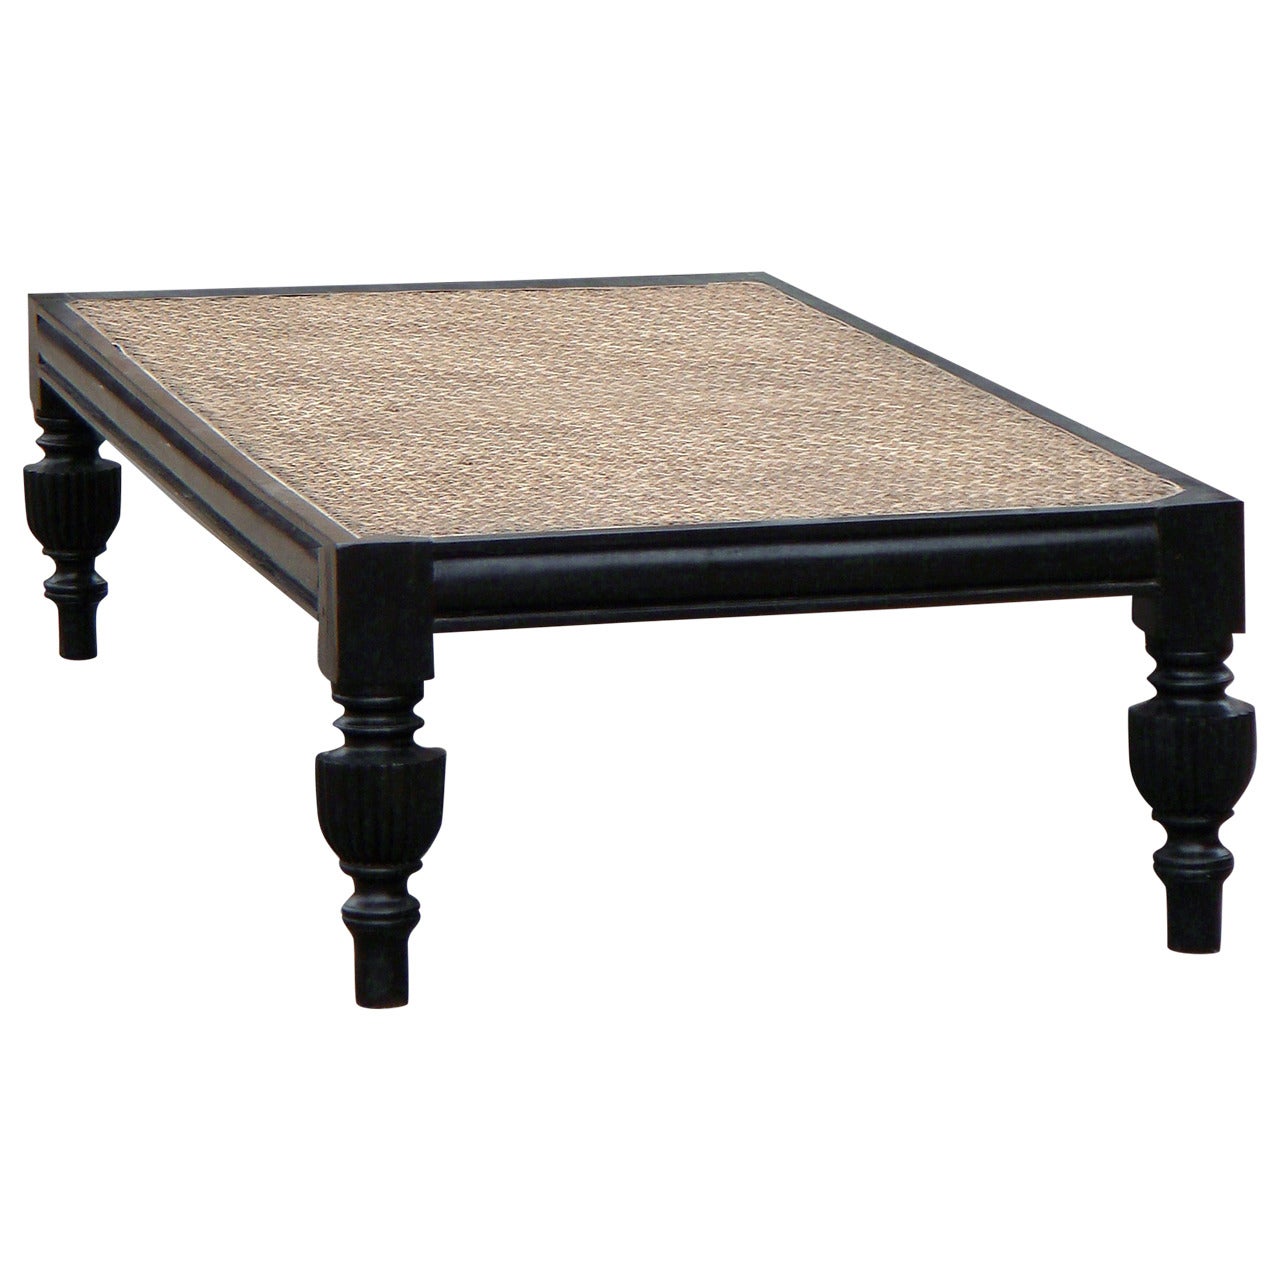 Anglo-Ceylonese Low Table in Solid Ebony with a Hard Caned Covered Top For Sale